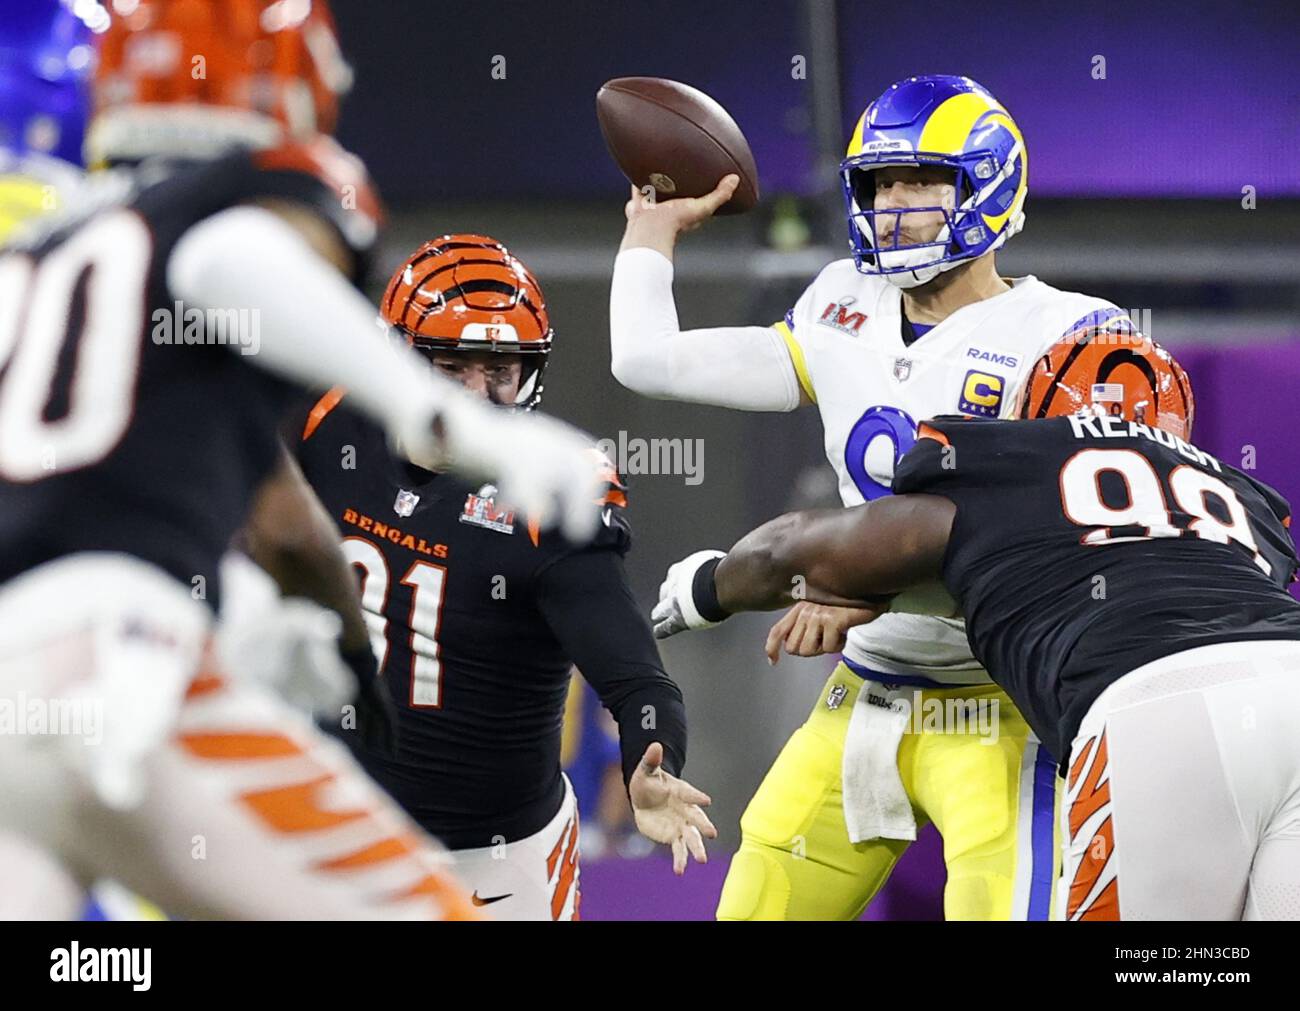 Los Angeles, United States. 13th Feb, 2022. Los Angeles Rams quarterback Matthew Stafford (9) throws a pass while under pressure by Cincinnati Bengals nose tackle D.J. Reader (98) in the third quarter of Super Bowl LVI at SoFi Stadium in Los Angeles on Sunday, February 13, 2022. Photo by John Angelillo/UPI Credit: UPI/Alamy Live News Stock Photo